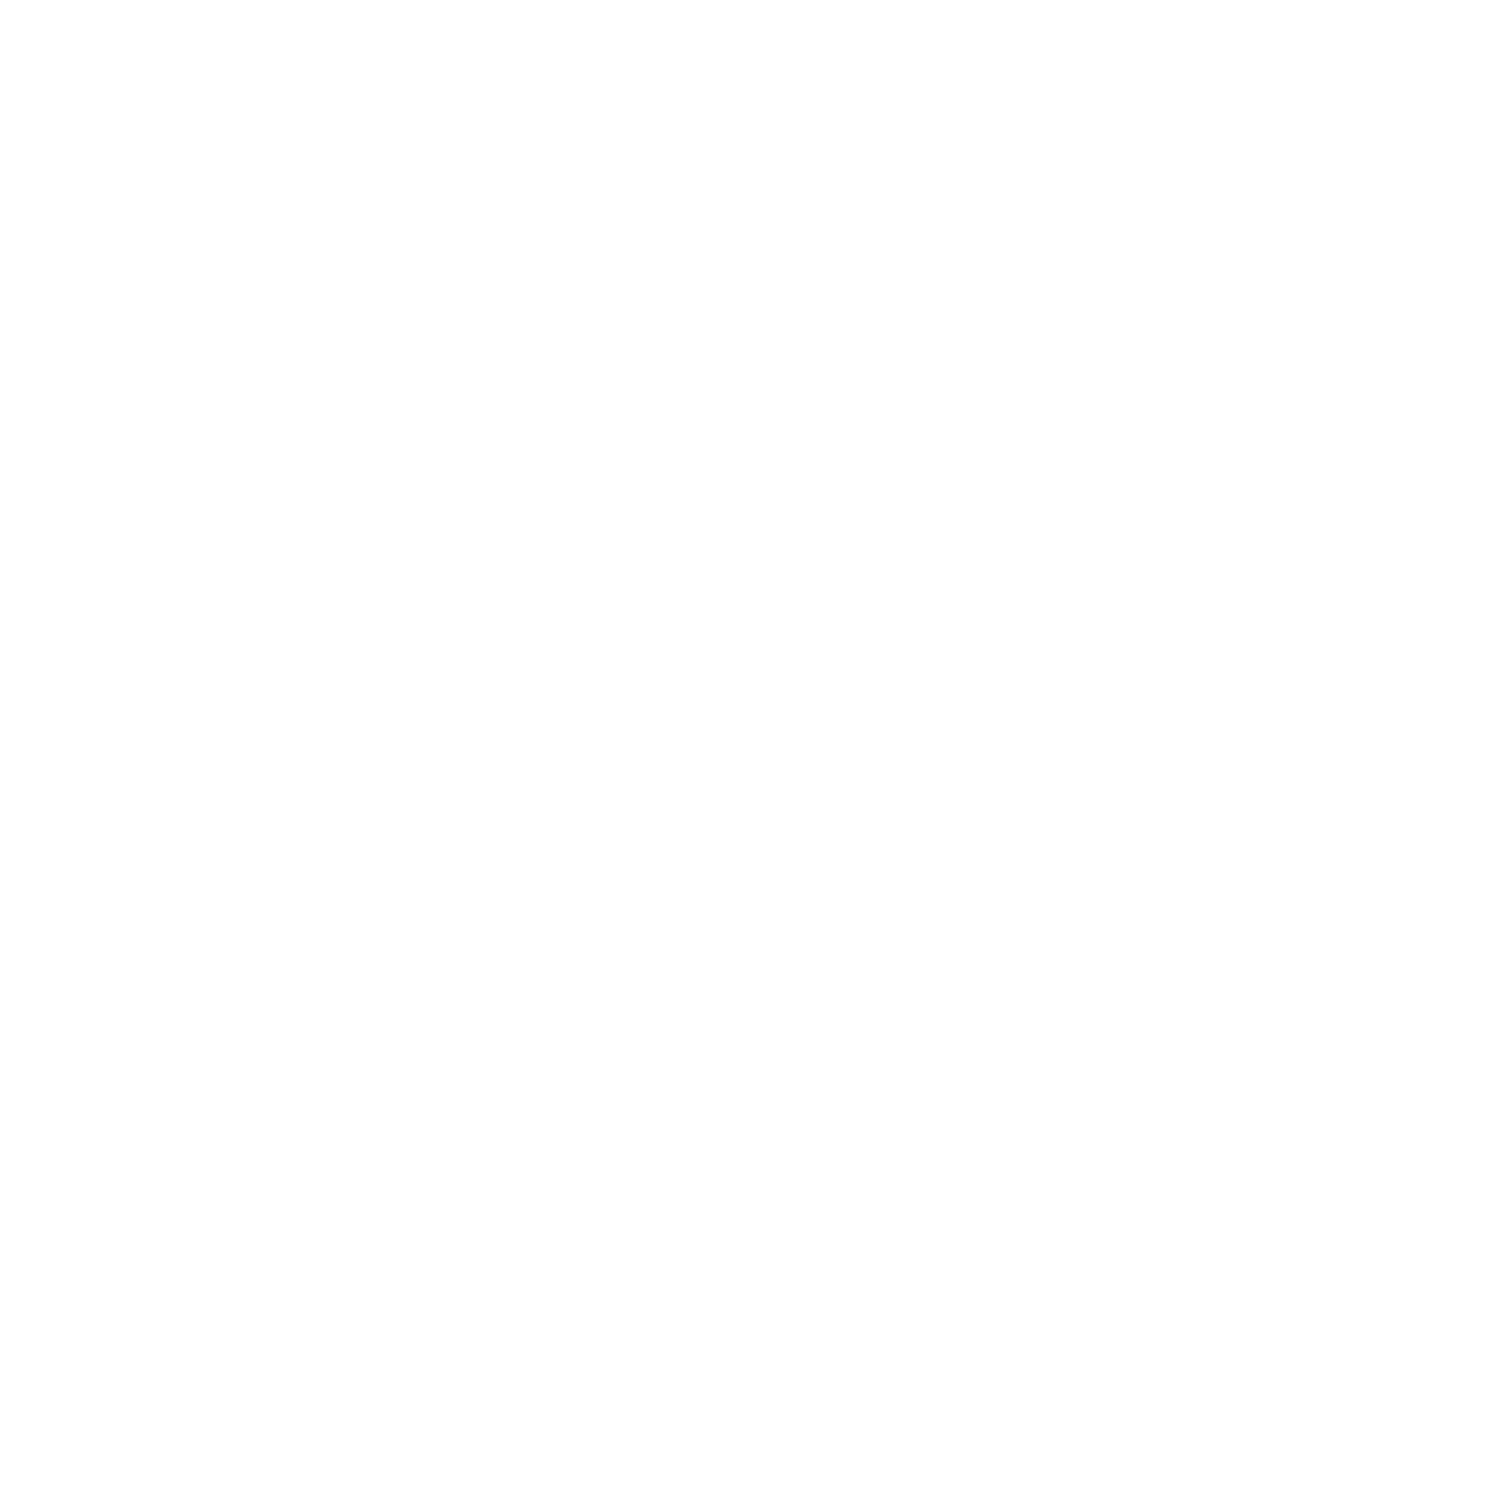 SNOW FINANCIAL GROUP